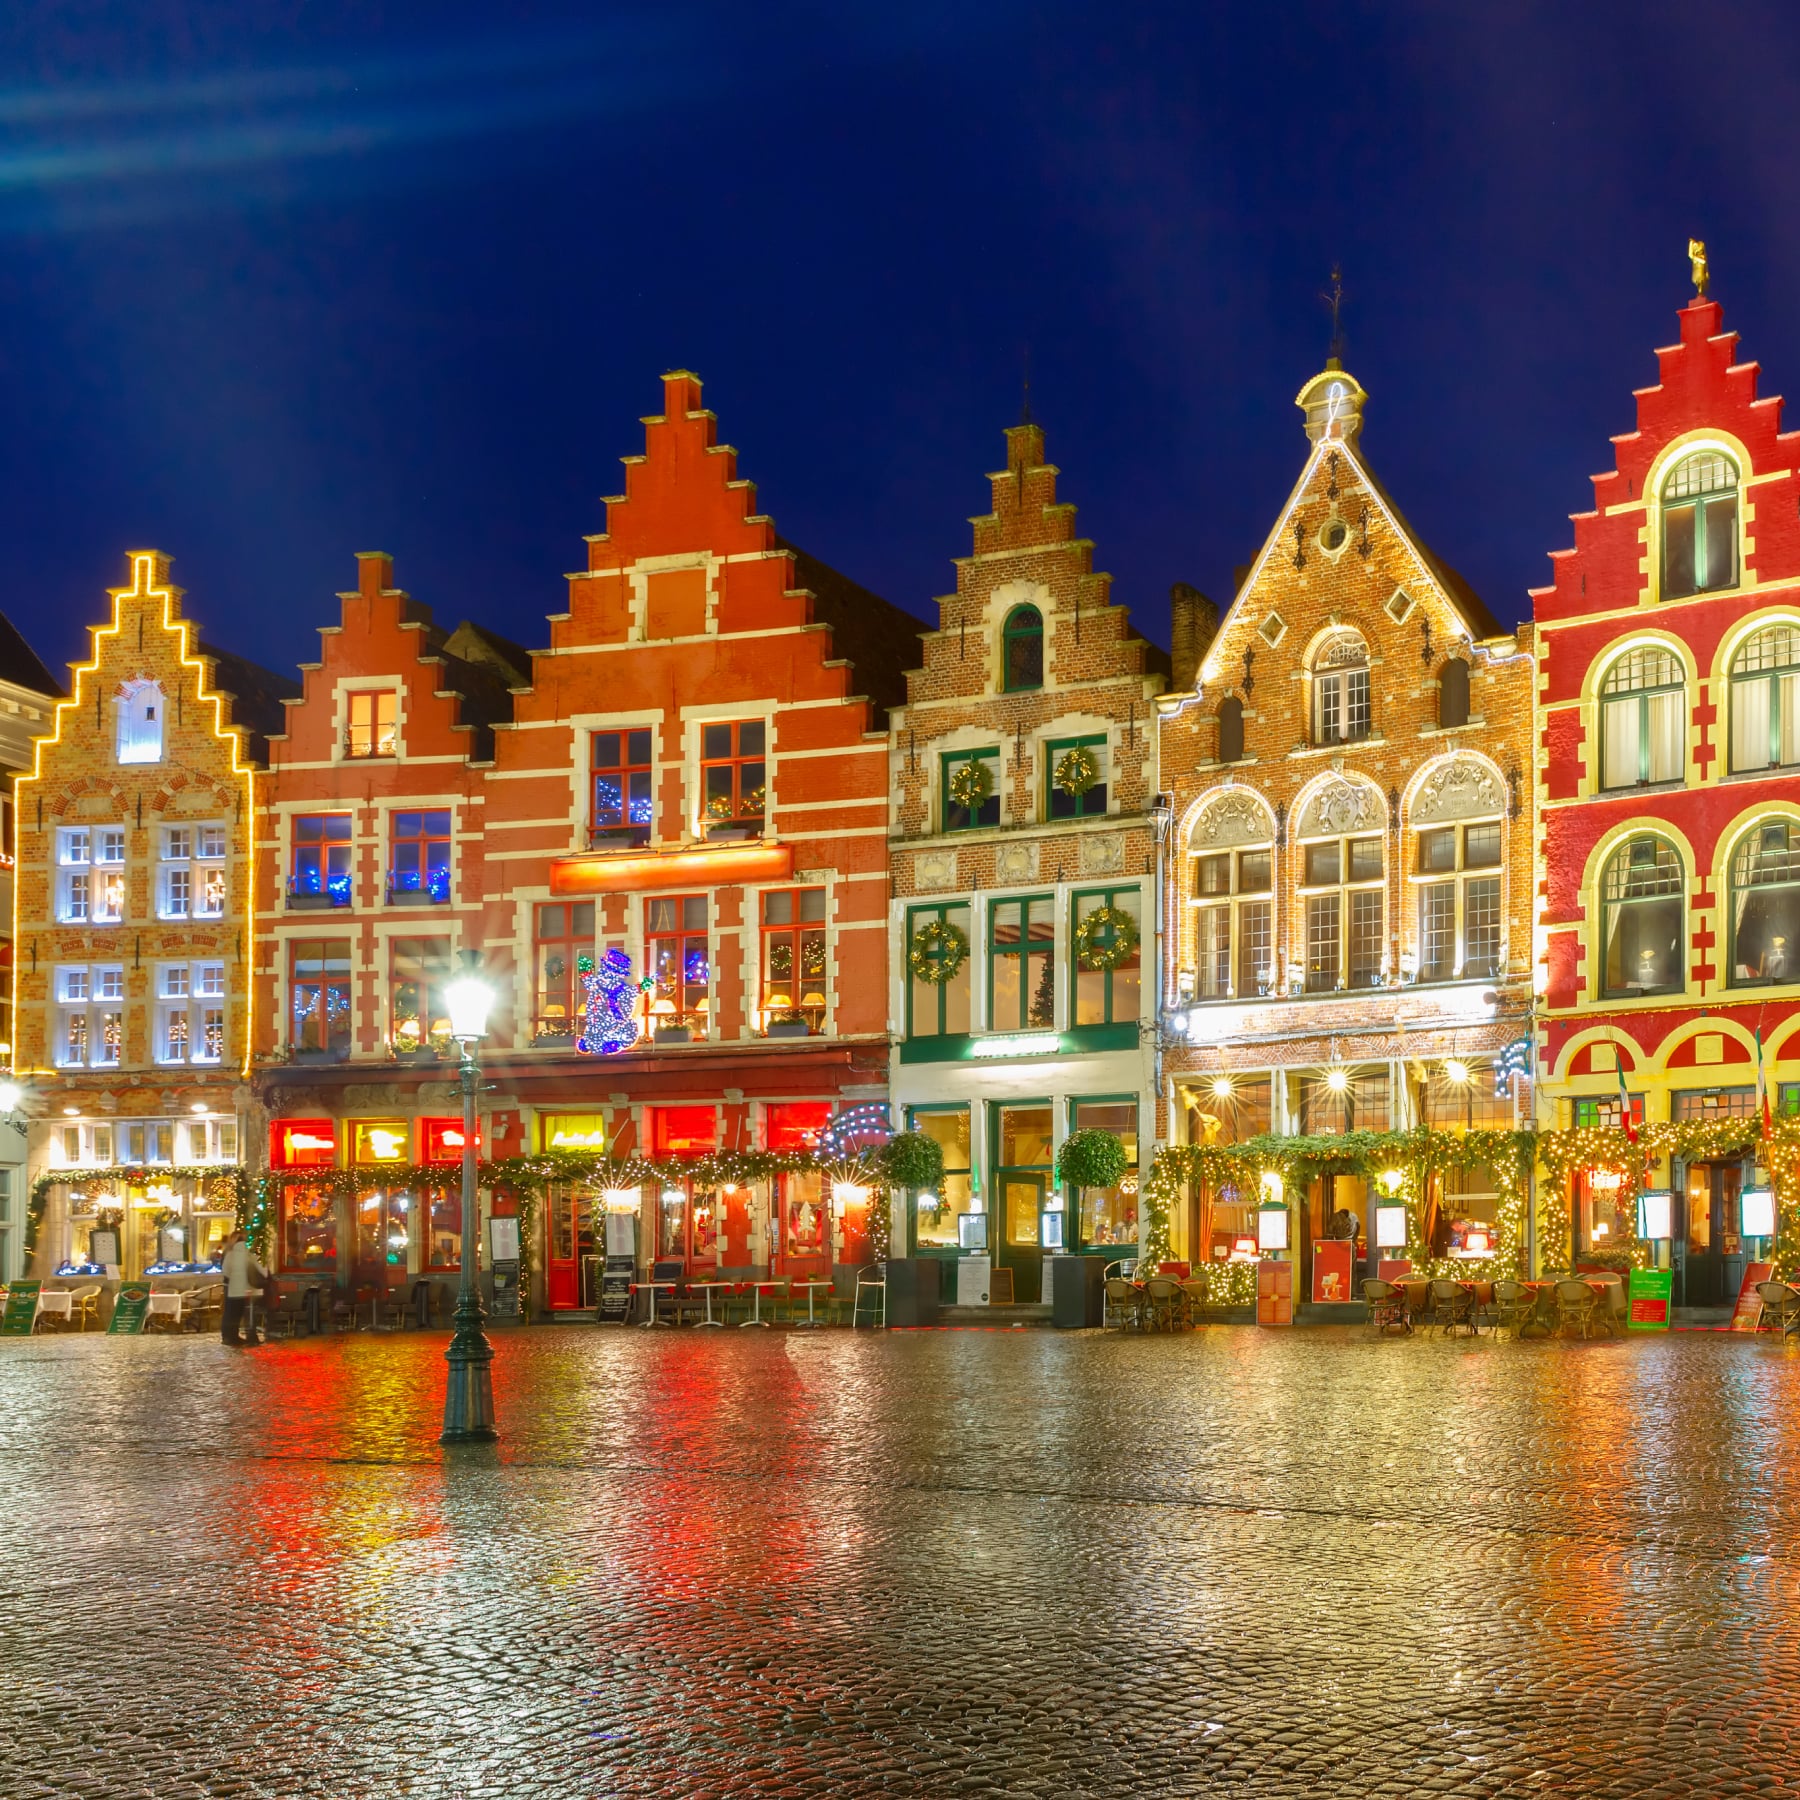 Bruges at christmas - one of the best places to spend Christmas